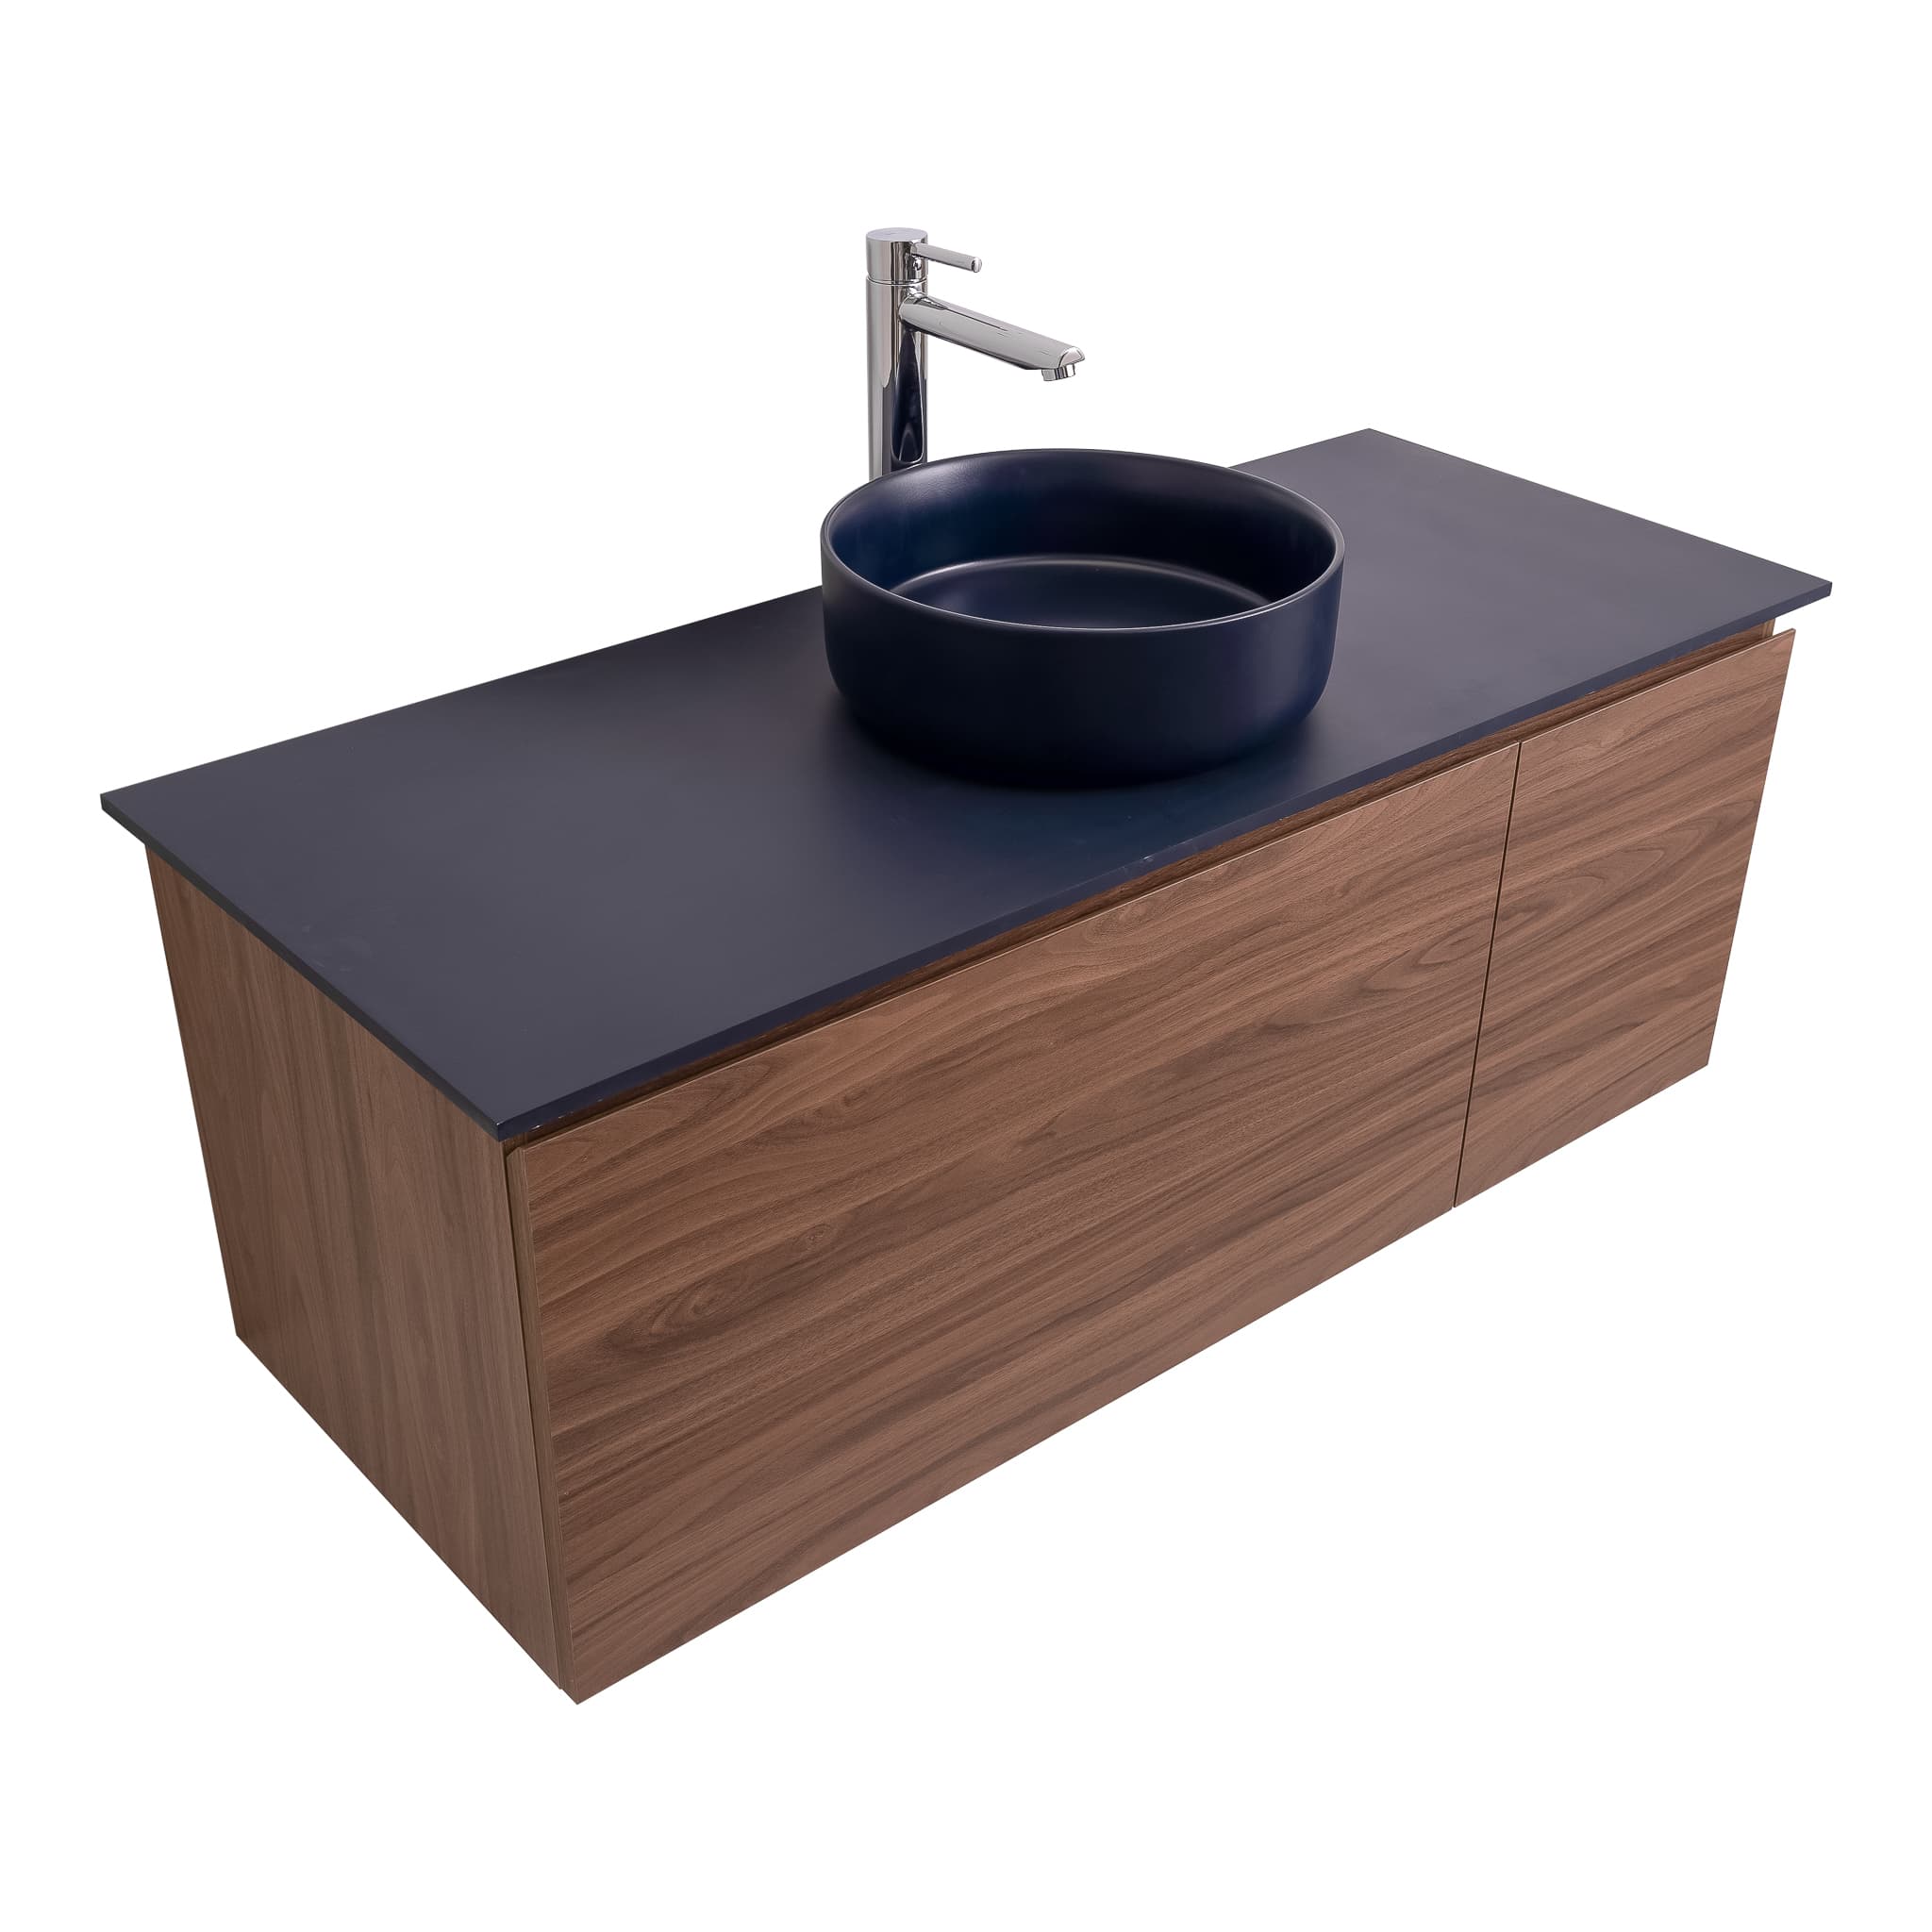 Venice 47.5 Walnut Wood Texture Cabinet, Ares Navy Blue Top And Ares Navy Blue Ceramic Basin, Wall Mounted Modern Vanity Set